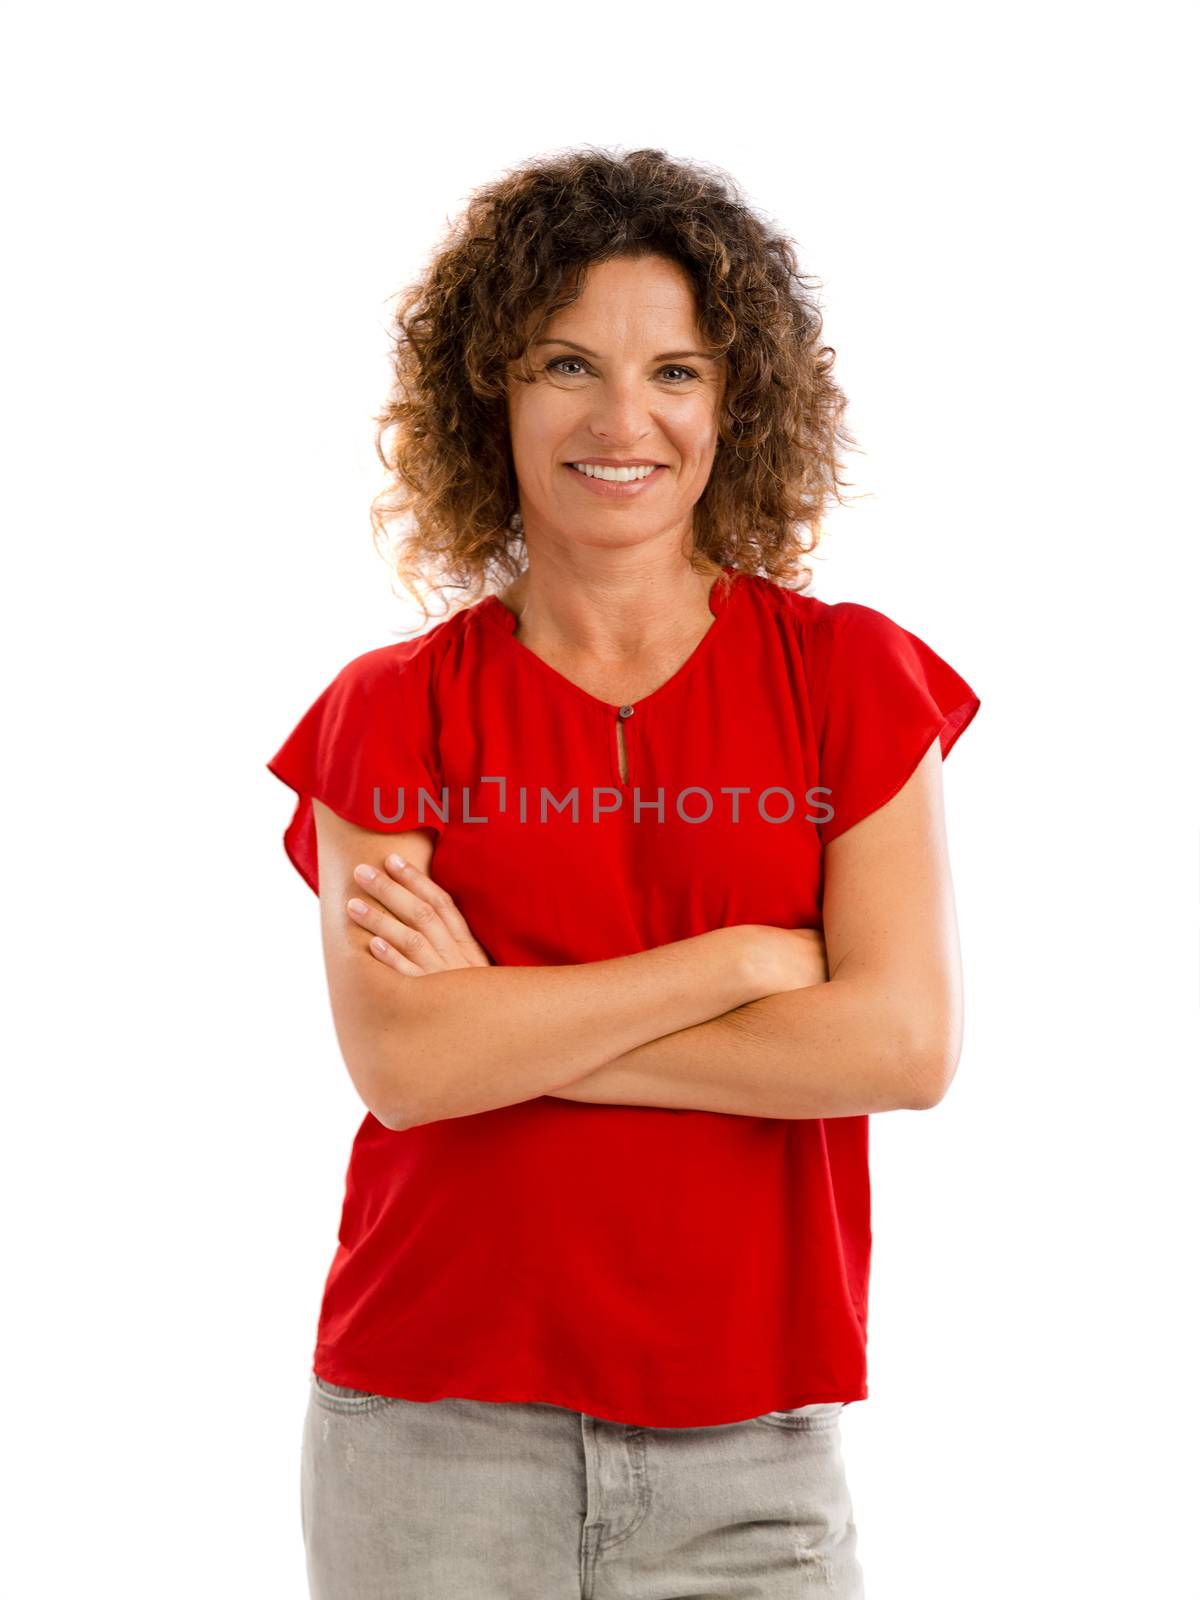 Portrait of a happy mature woman by Iko